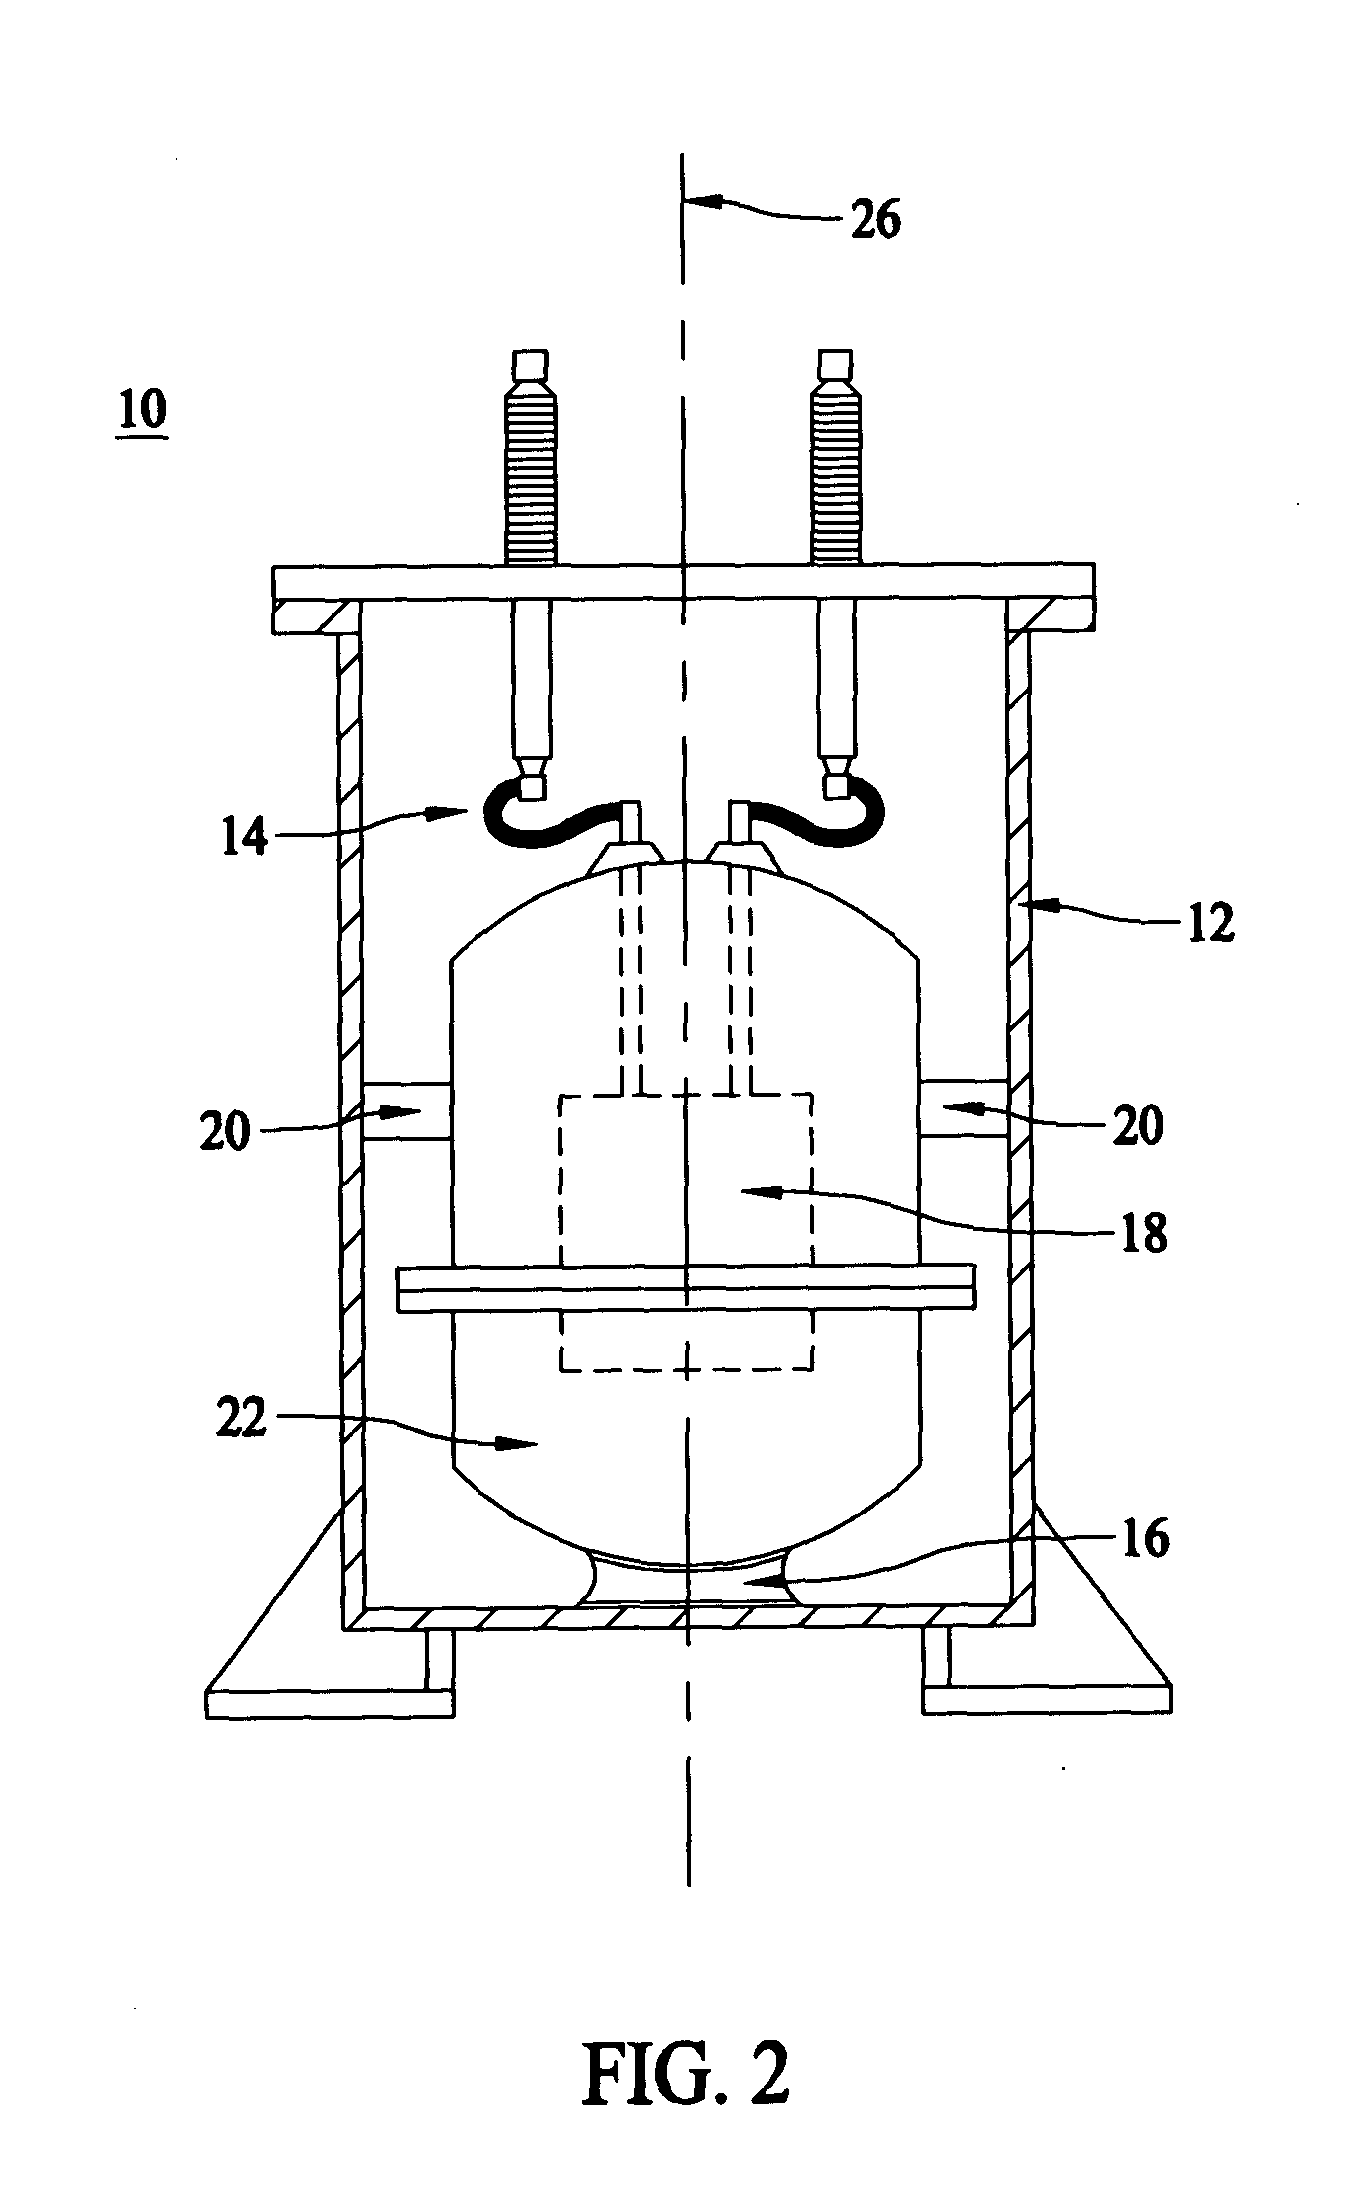 Mechanical support system for devices operating at cryogenic temperature